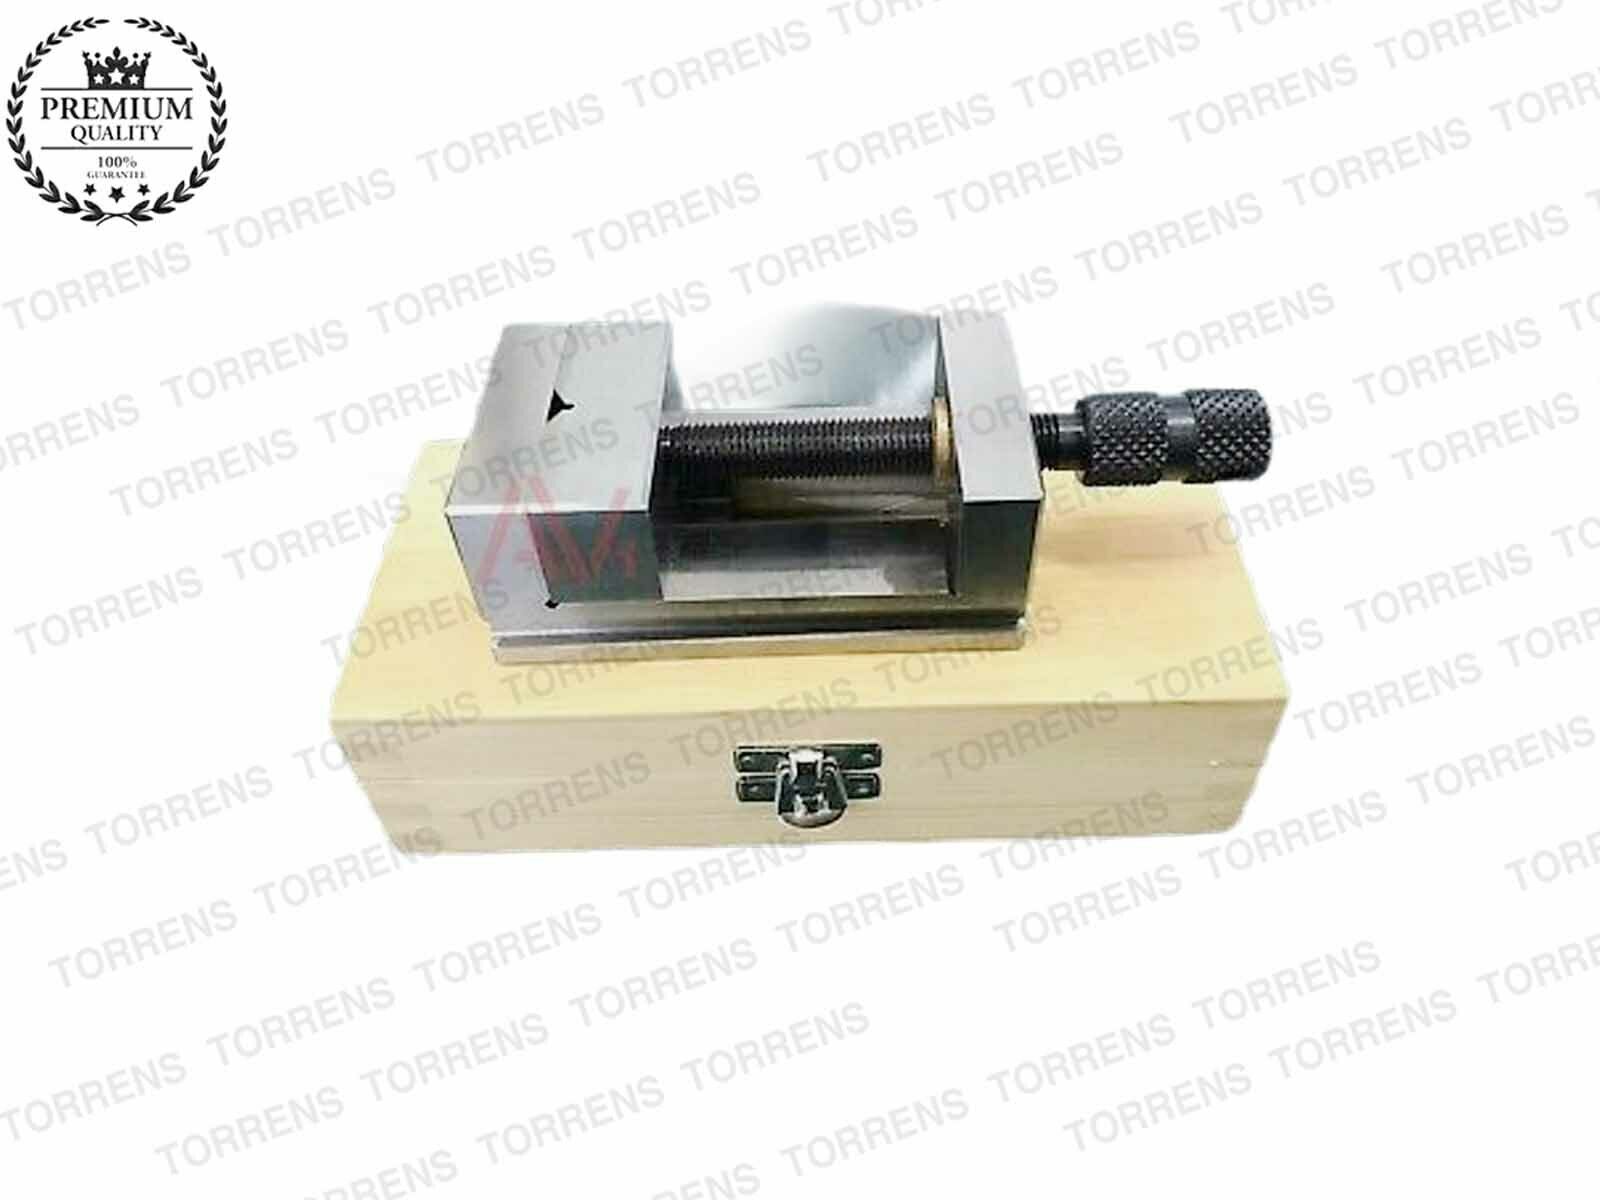 2-3/8" 60mm Toolmakers Grinding Vise Vice Precision Machine Vice Wooden Box